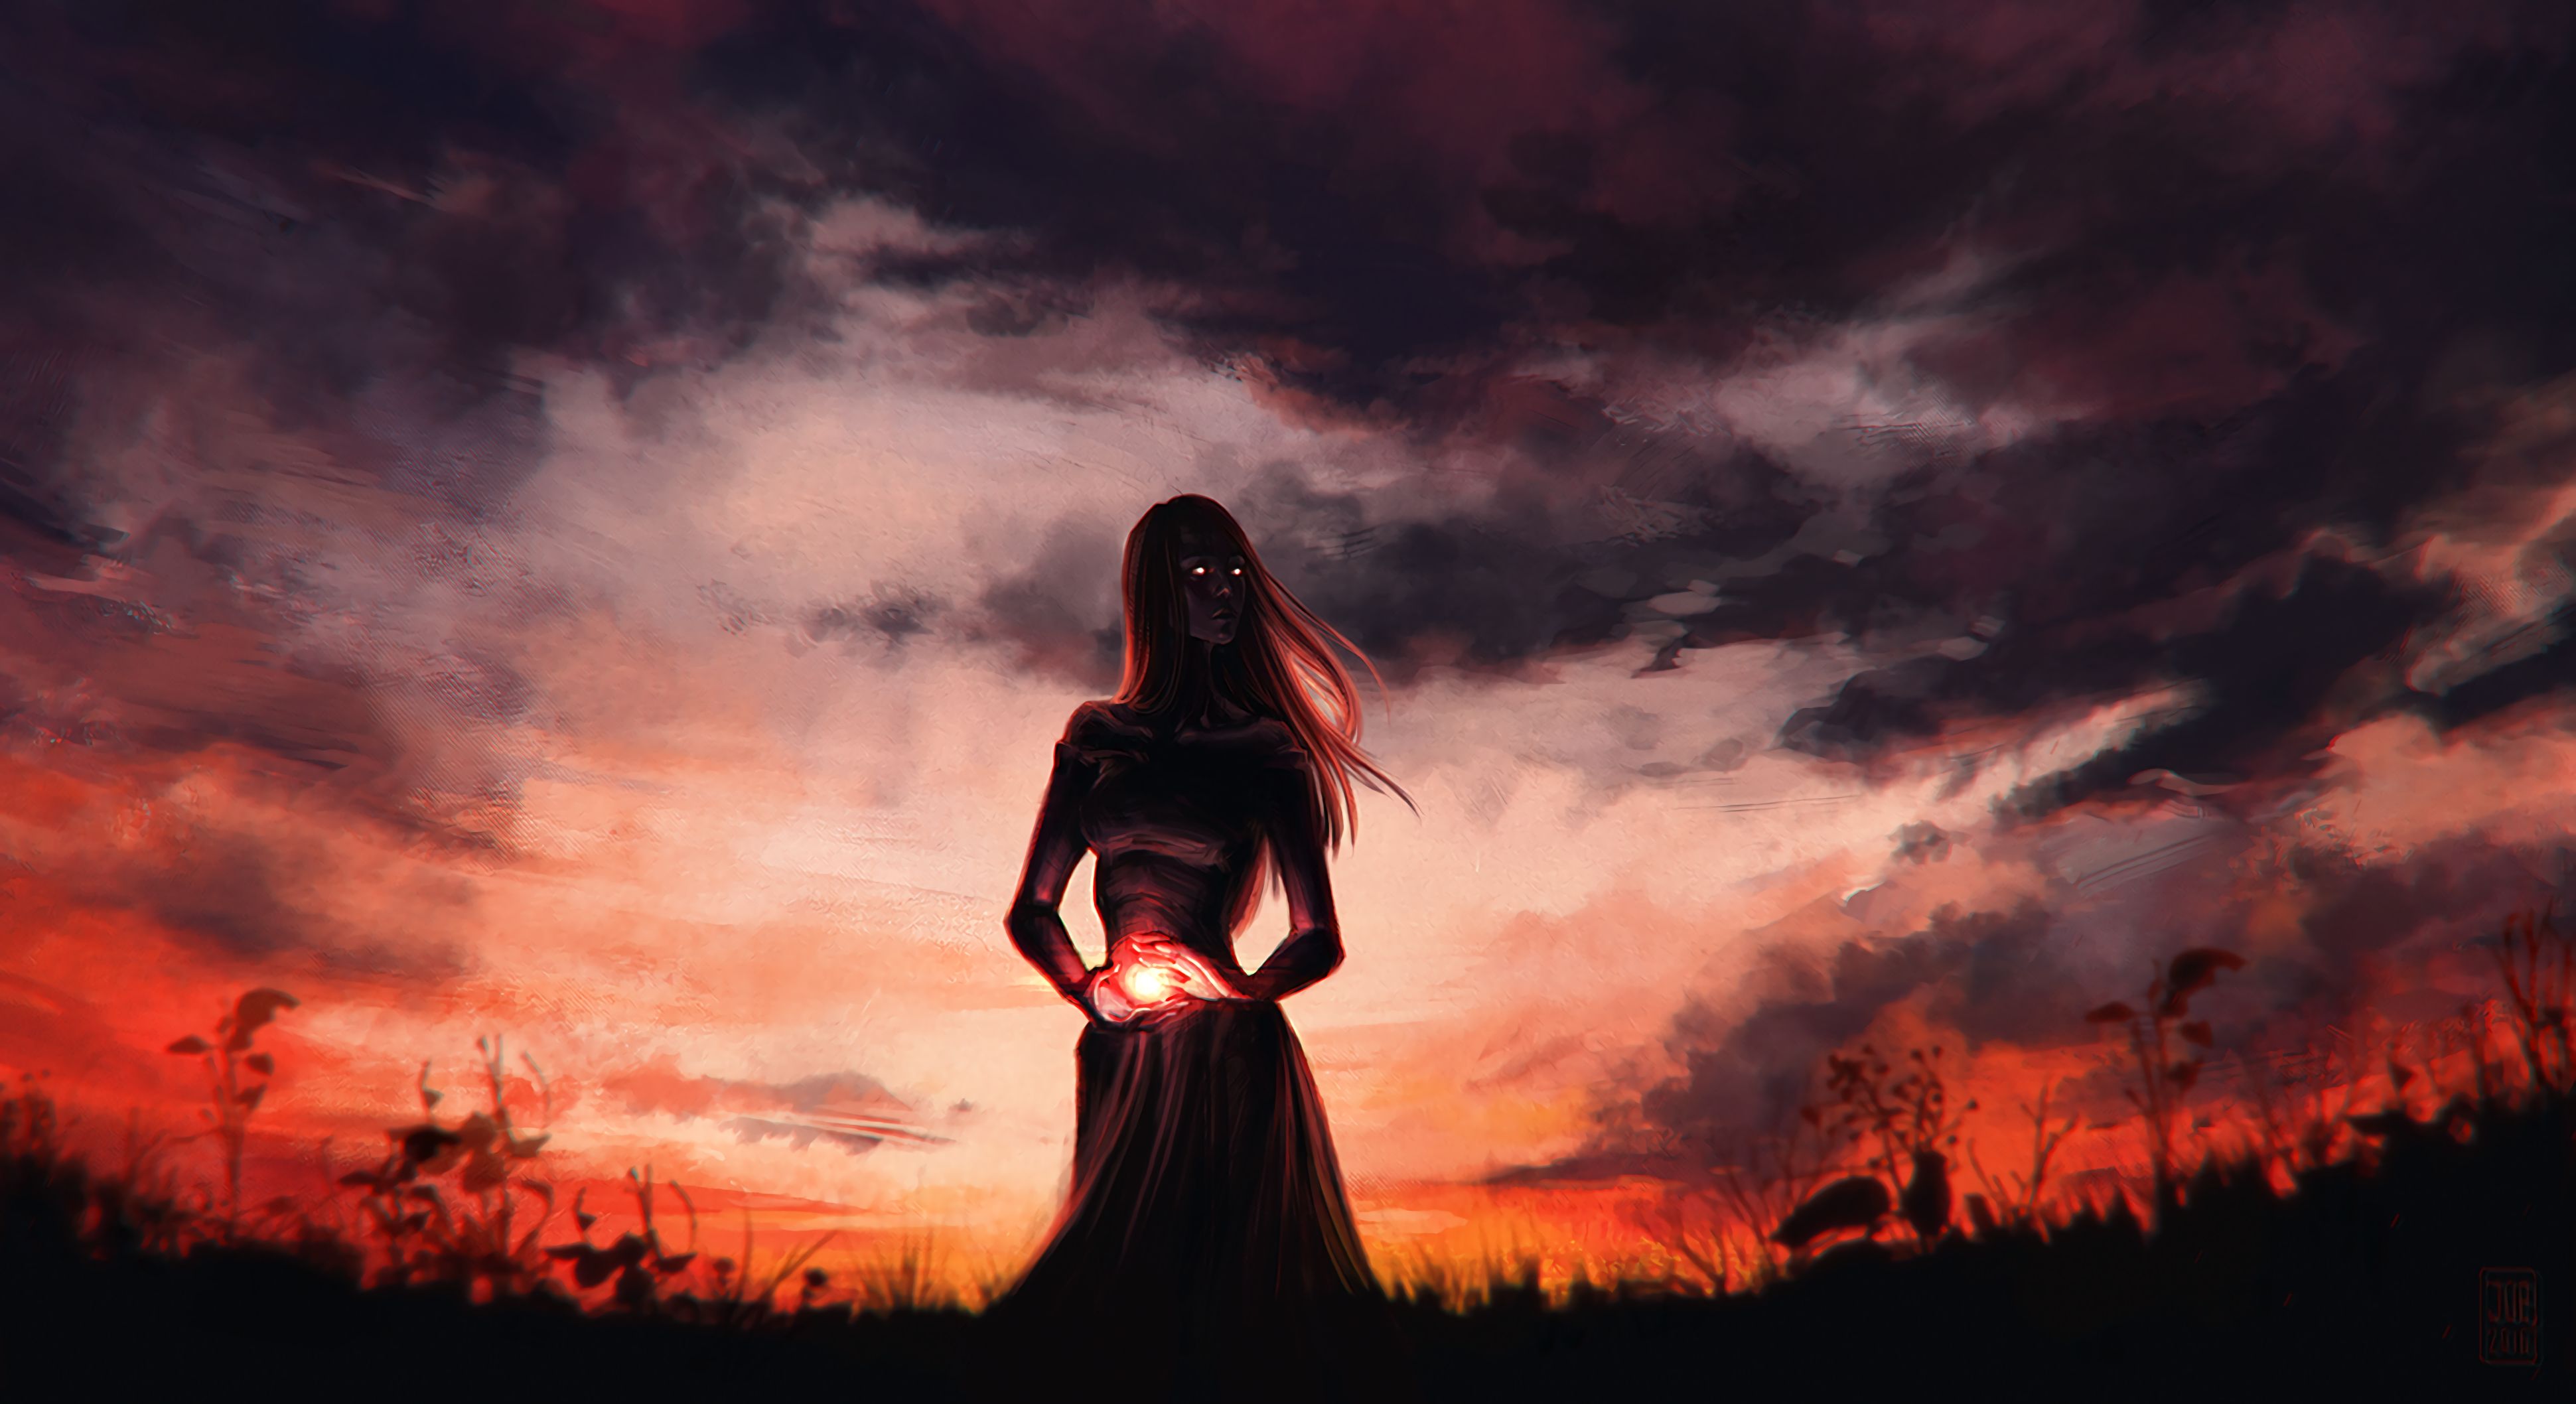 66029 free wallpaper 240x320 for phone, download images art, girl, shine, gloomy 240x320 for mobile